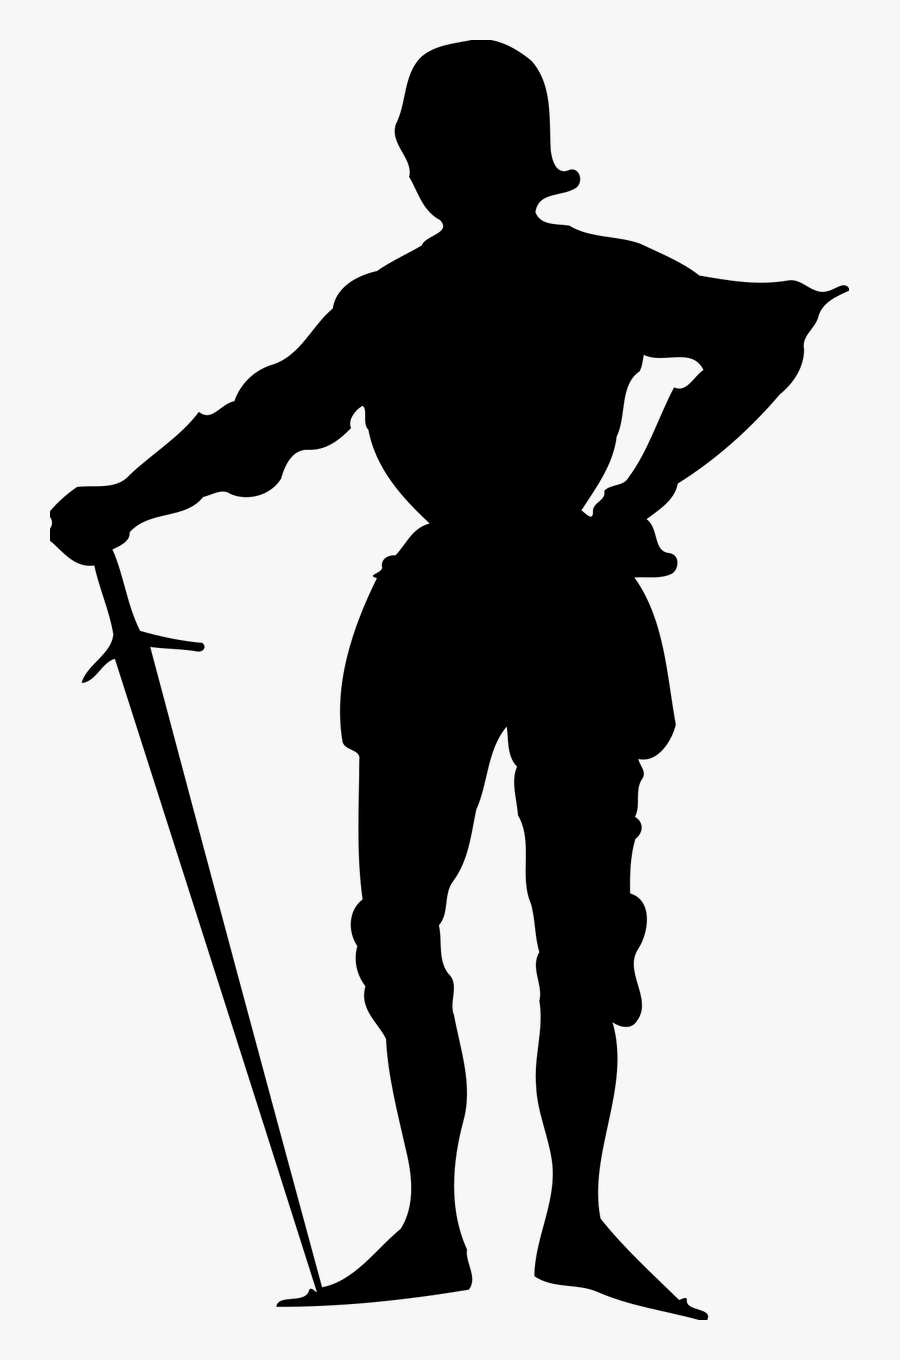 Knight Silhouette - Silhouette Of Black Knight, Transparent Clipart